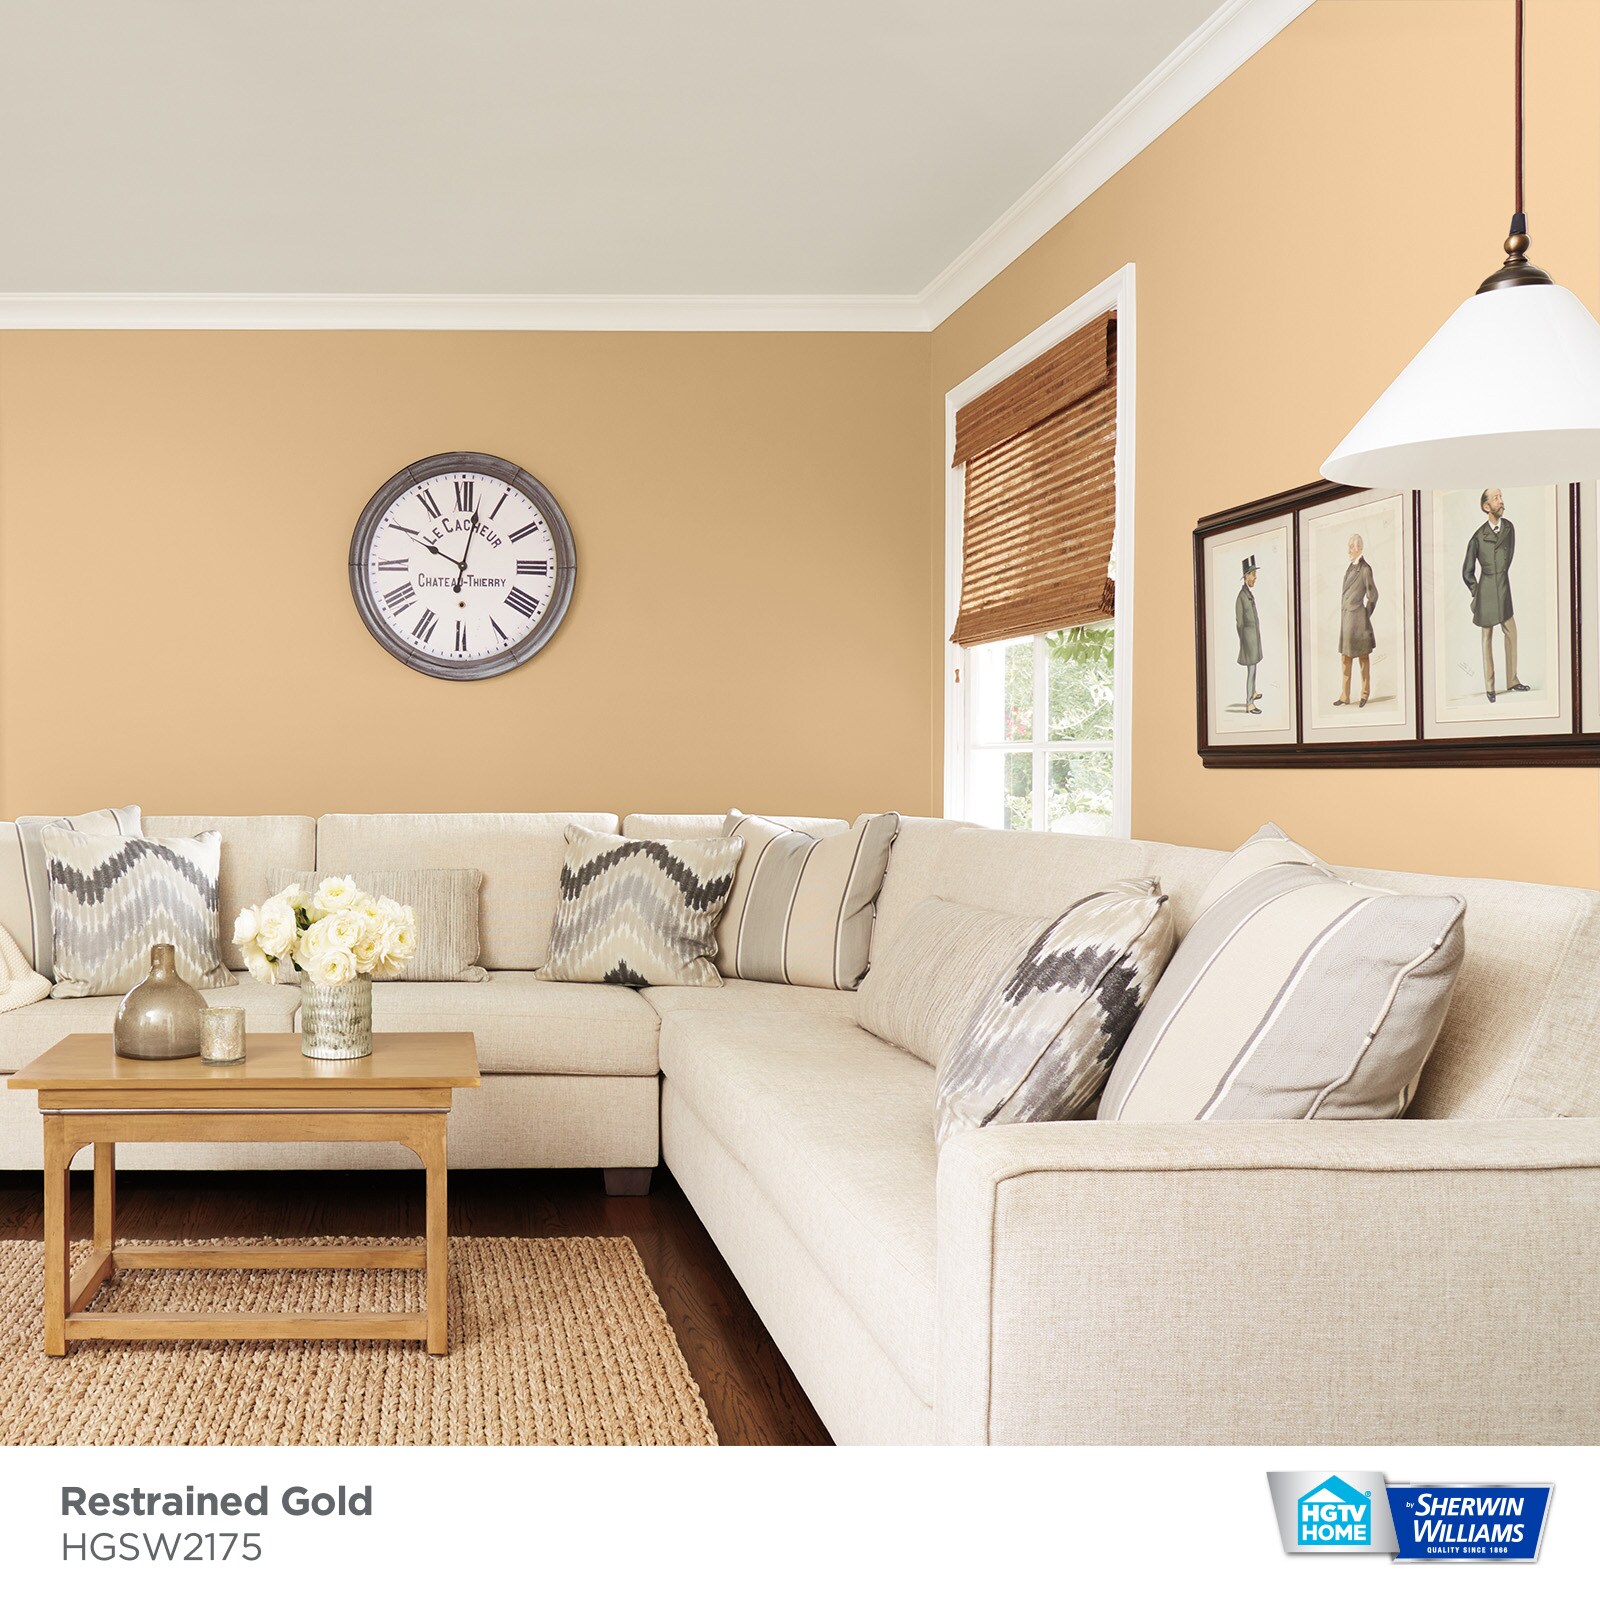 Fervent Brass Paint Sample by Sherwin-Williams (6405)